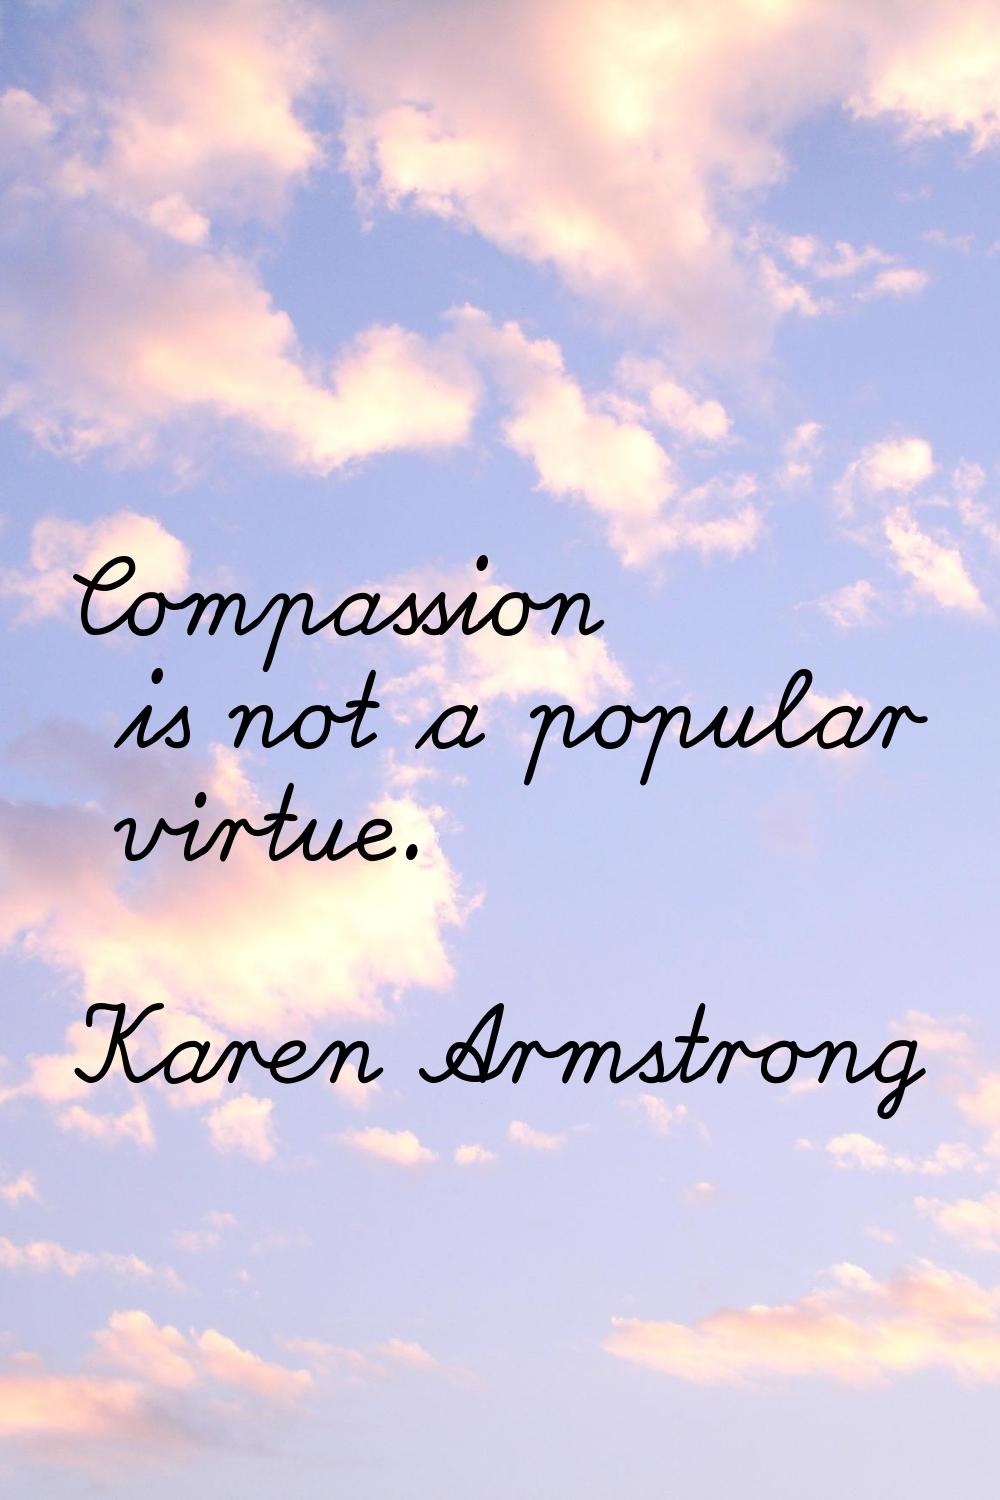 Compassion is not a popular virtue.